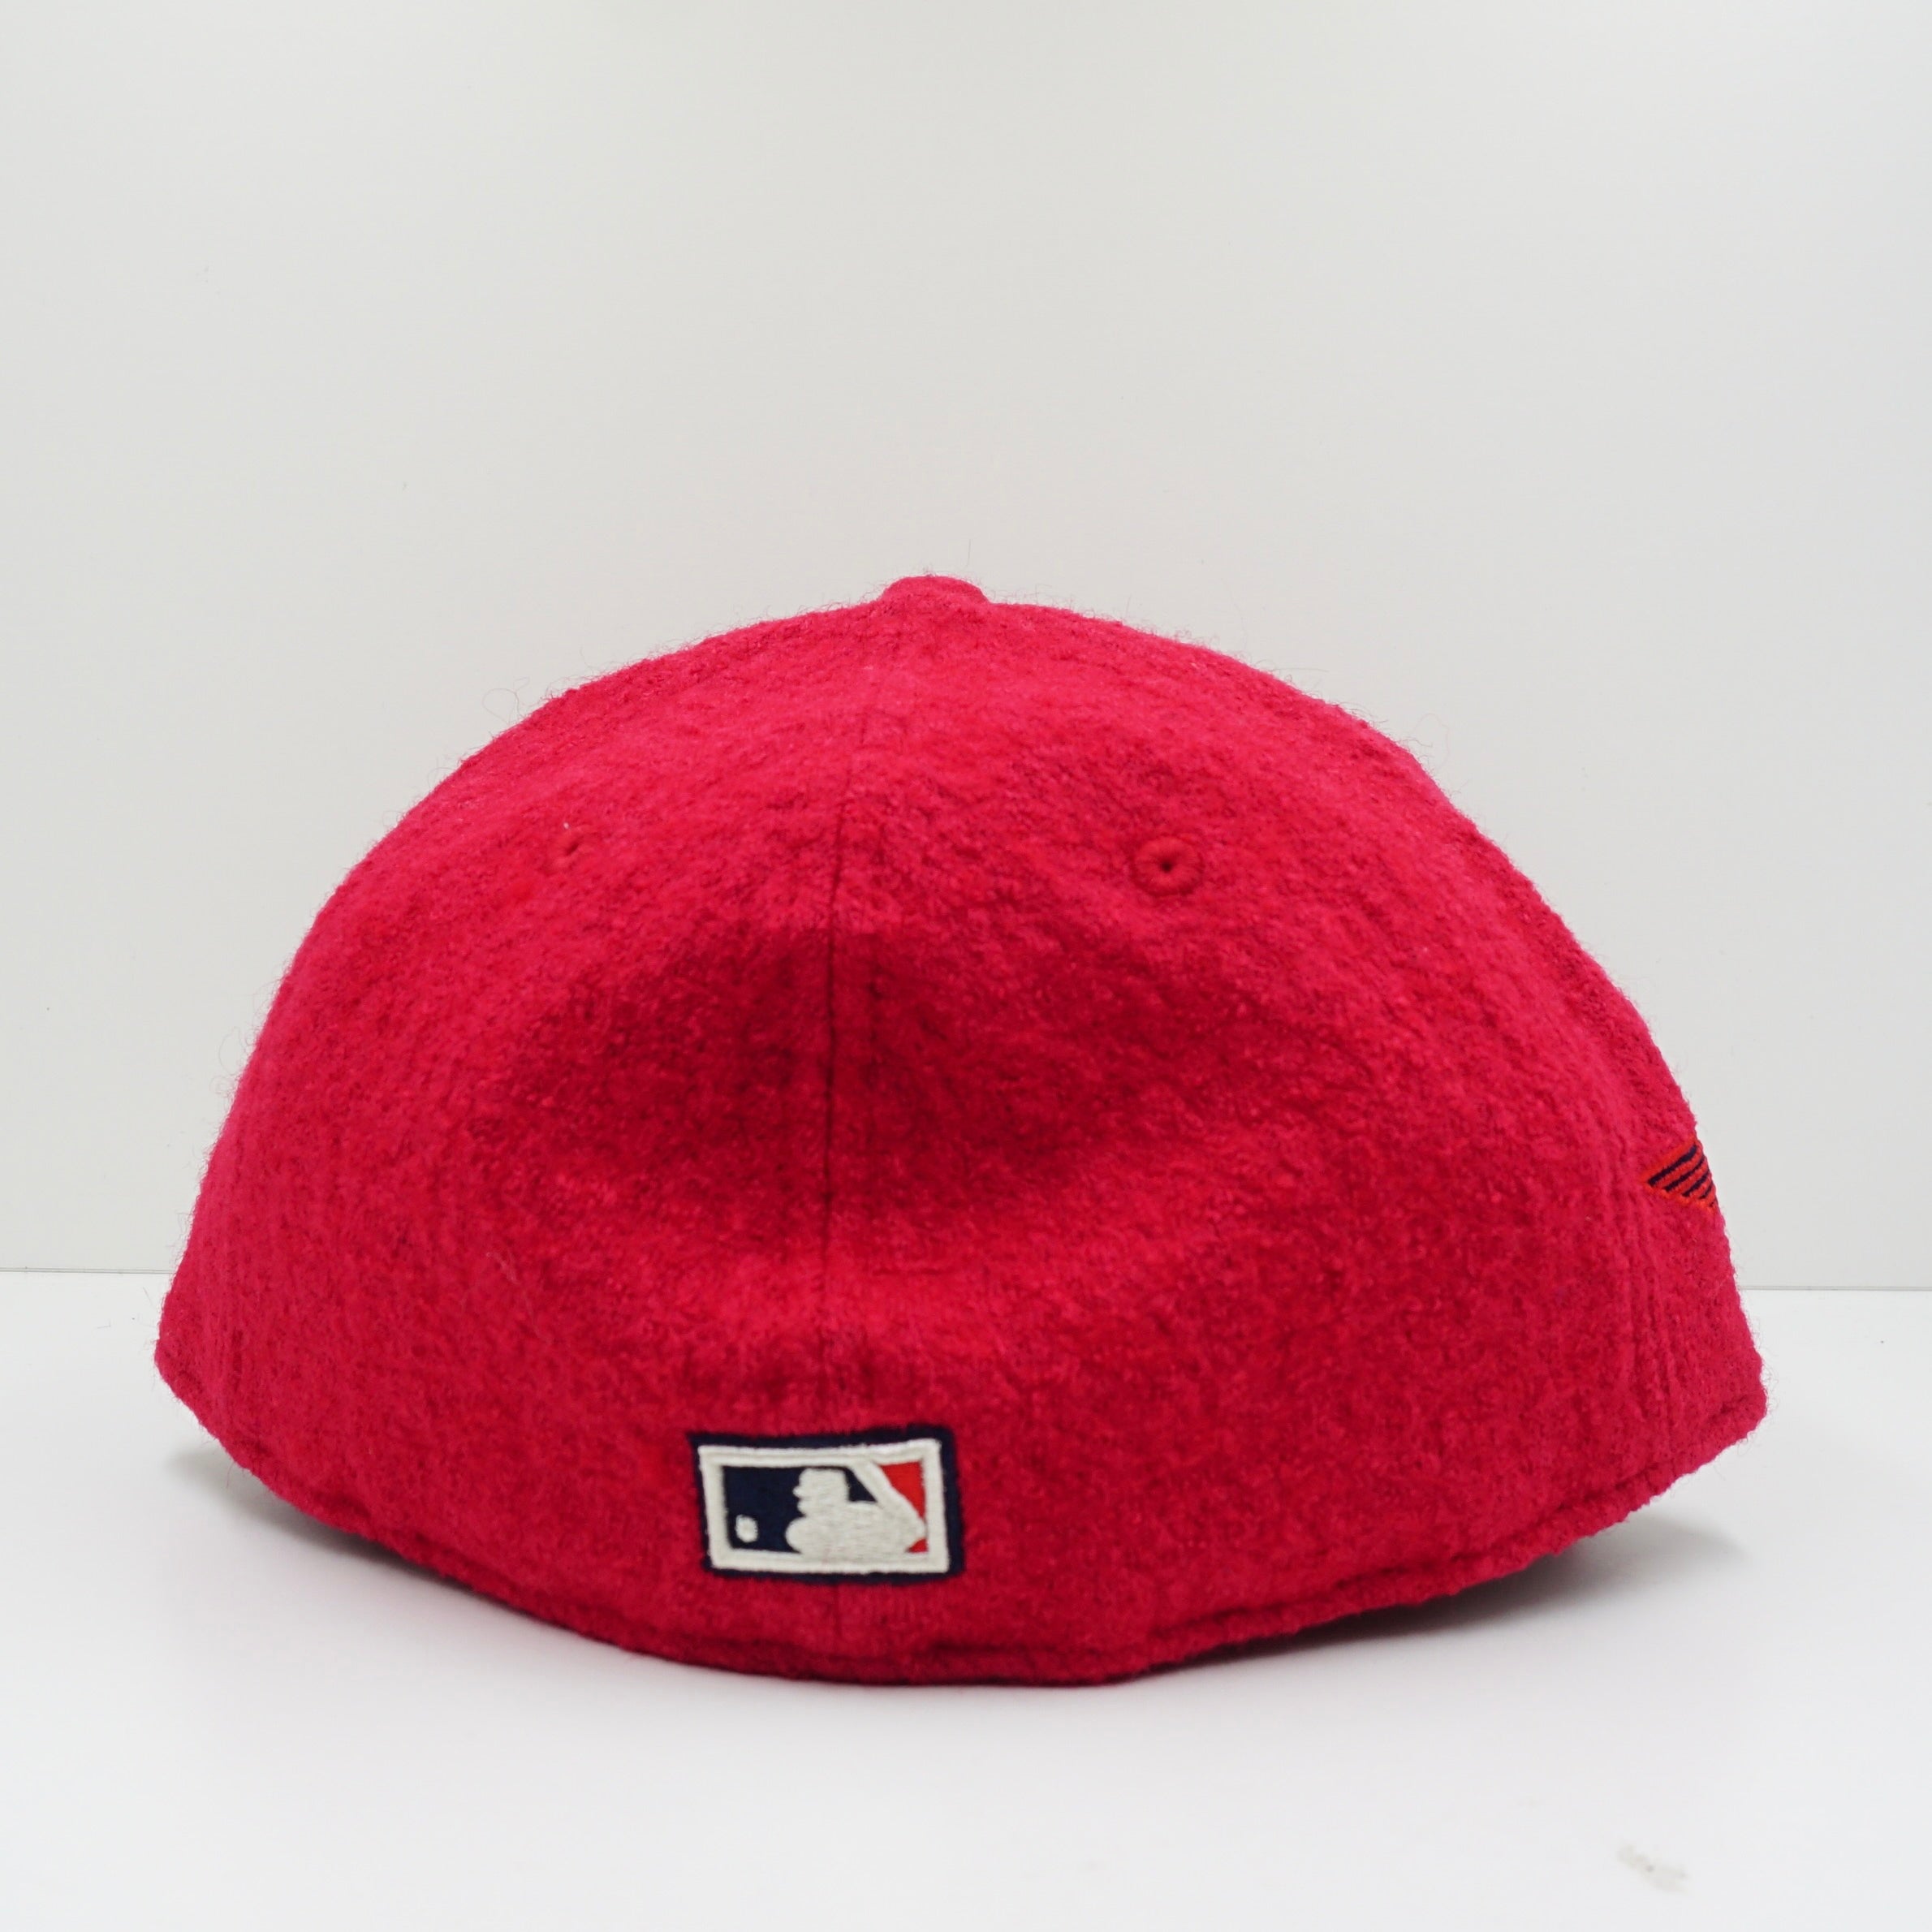 New Era Cooperstown St Louis Cardinals Rasberry Red Fitted Cap